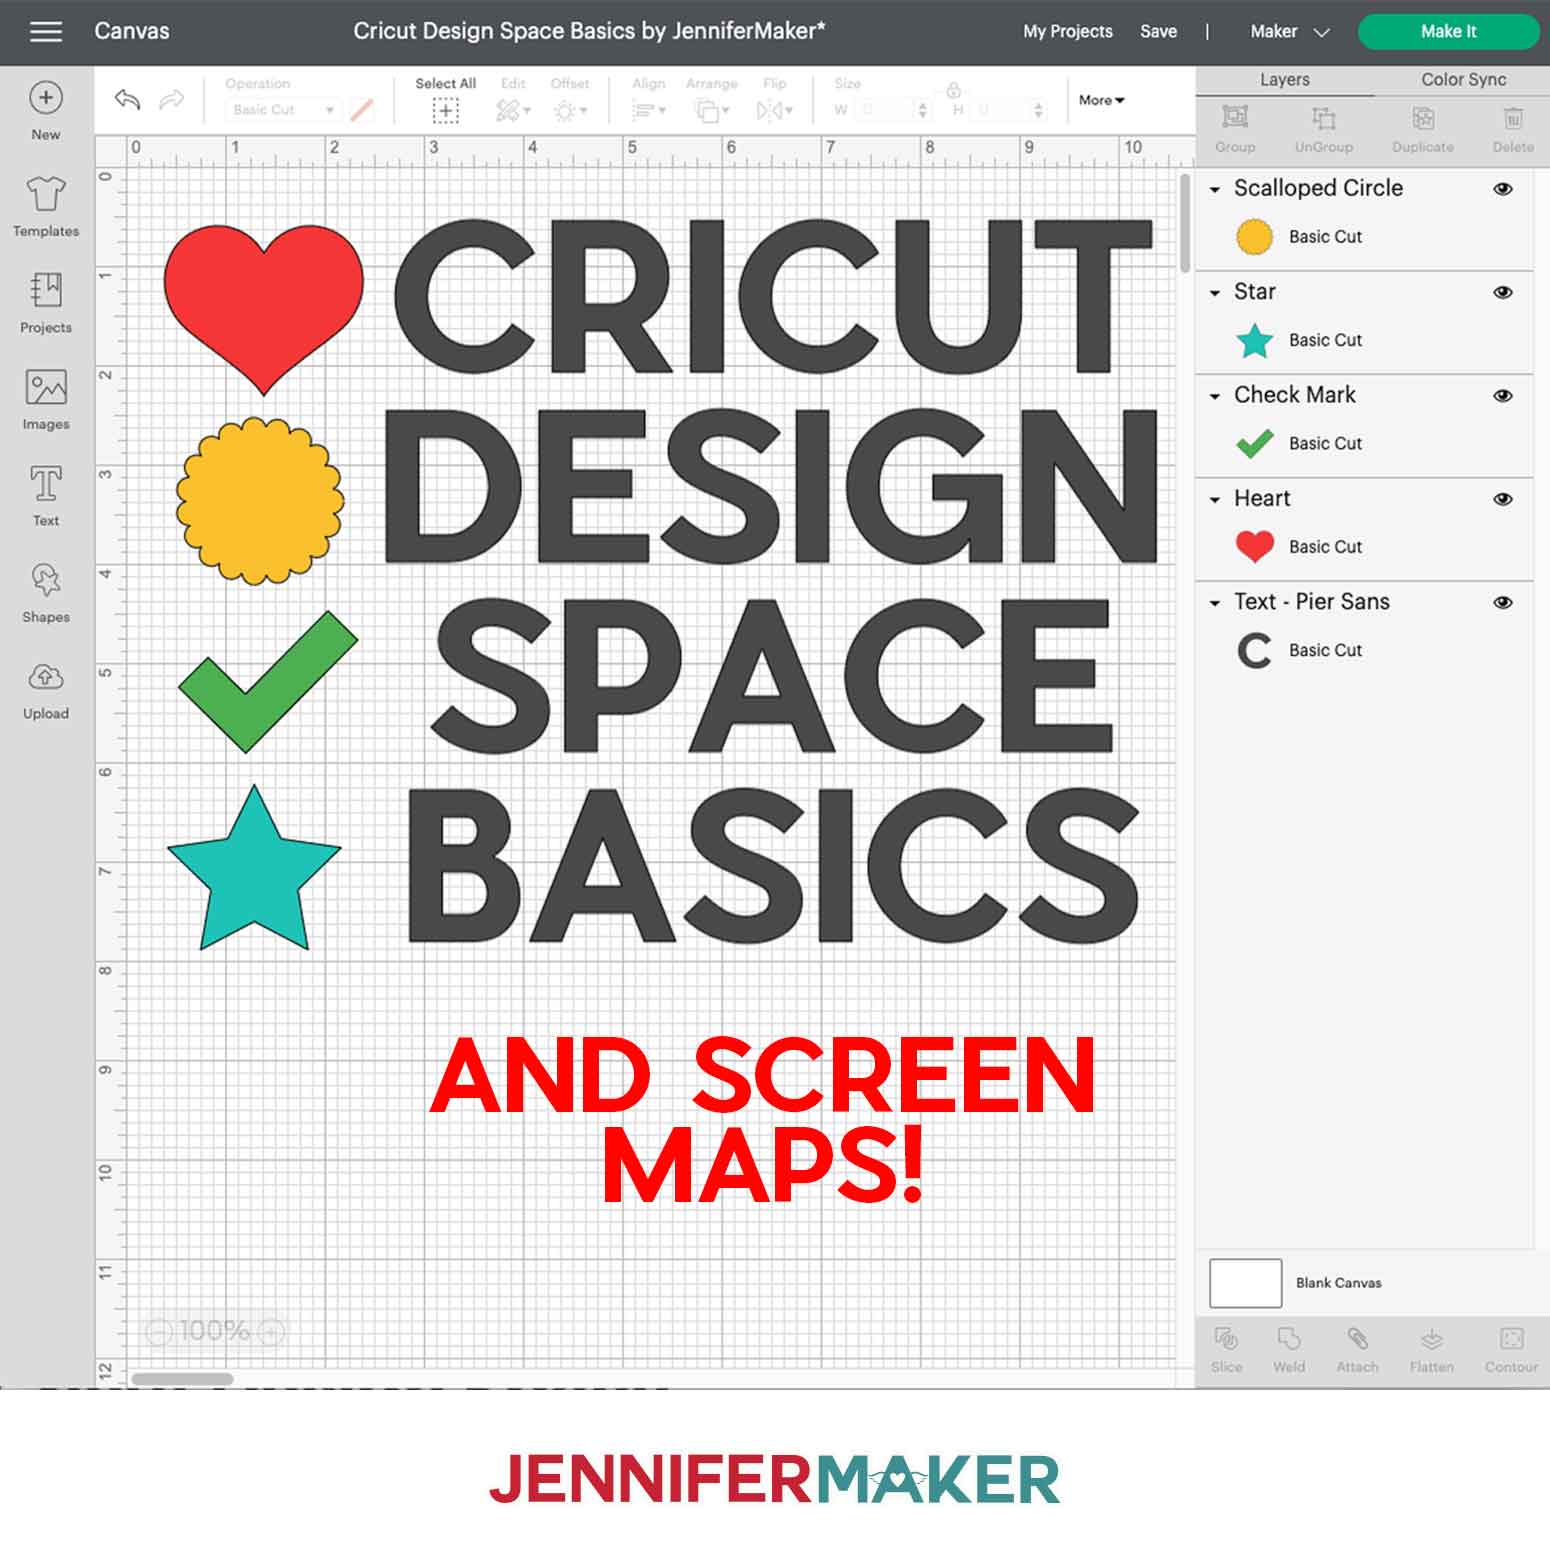 Cricut Design Space Basics: Tips to Use & Find Everything!